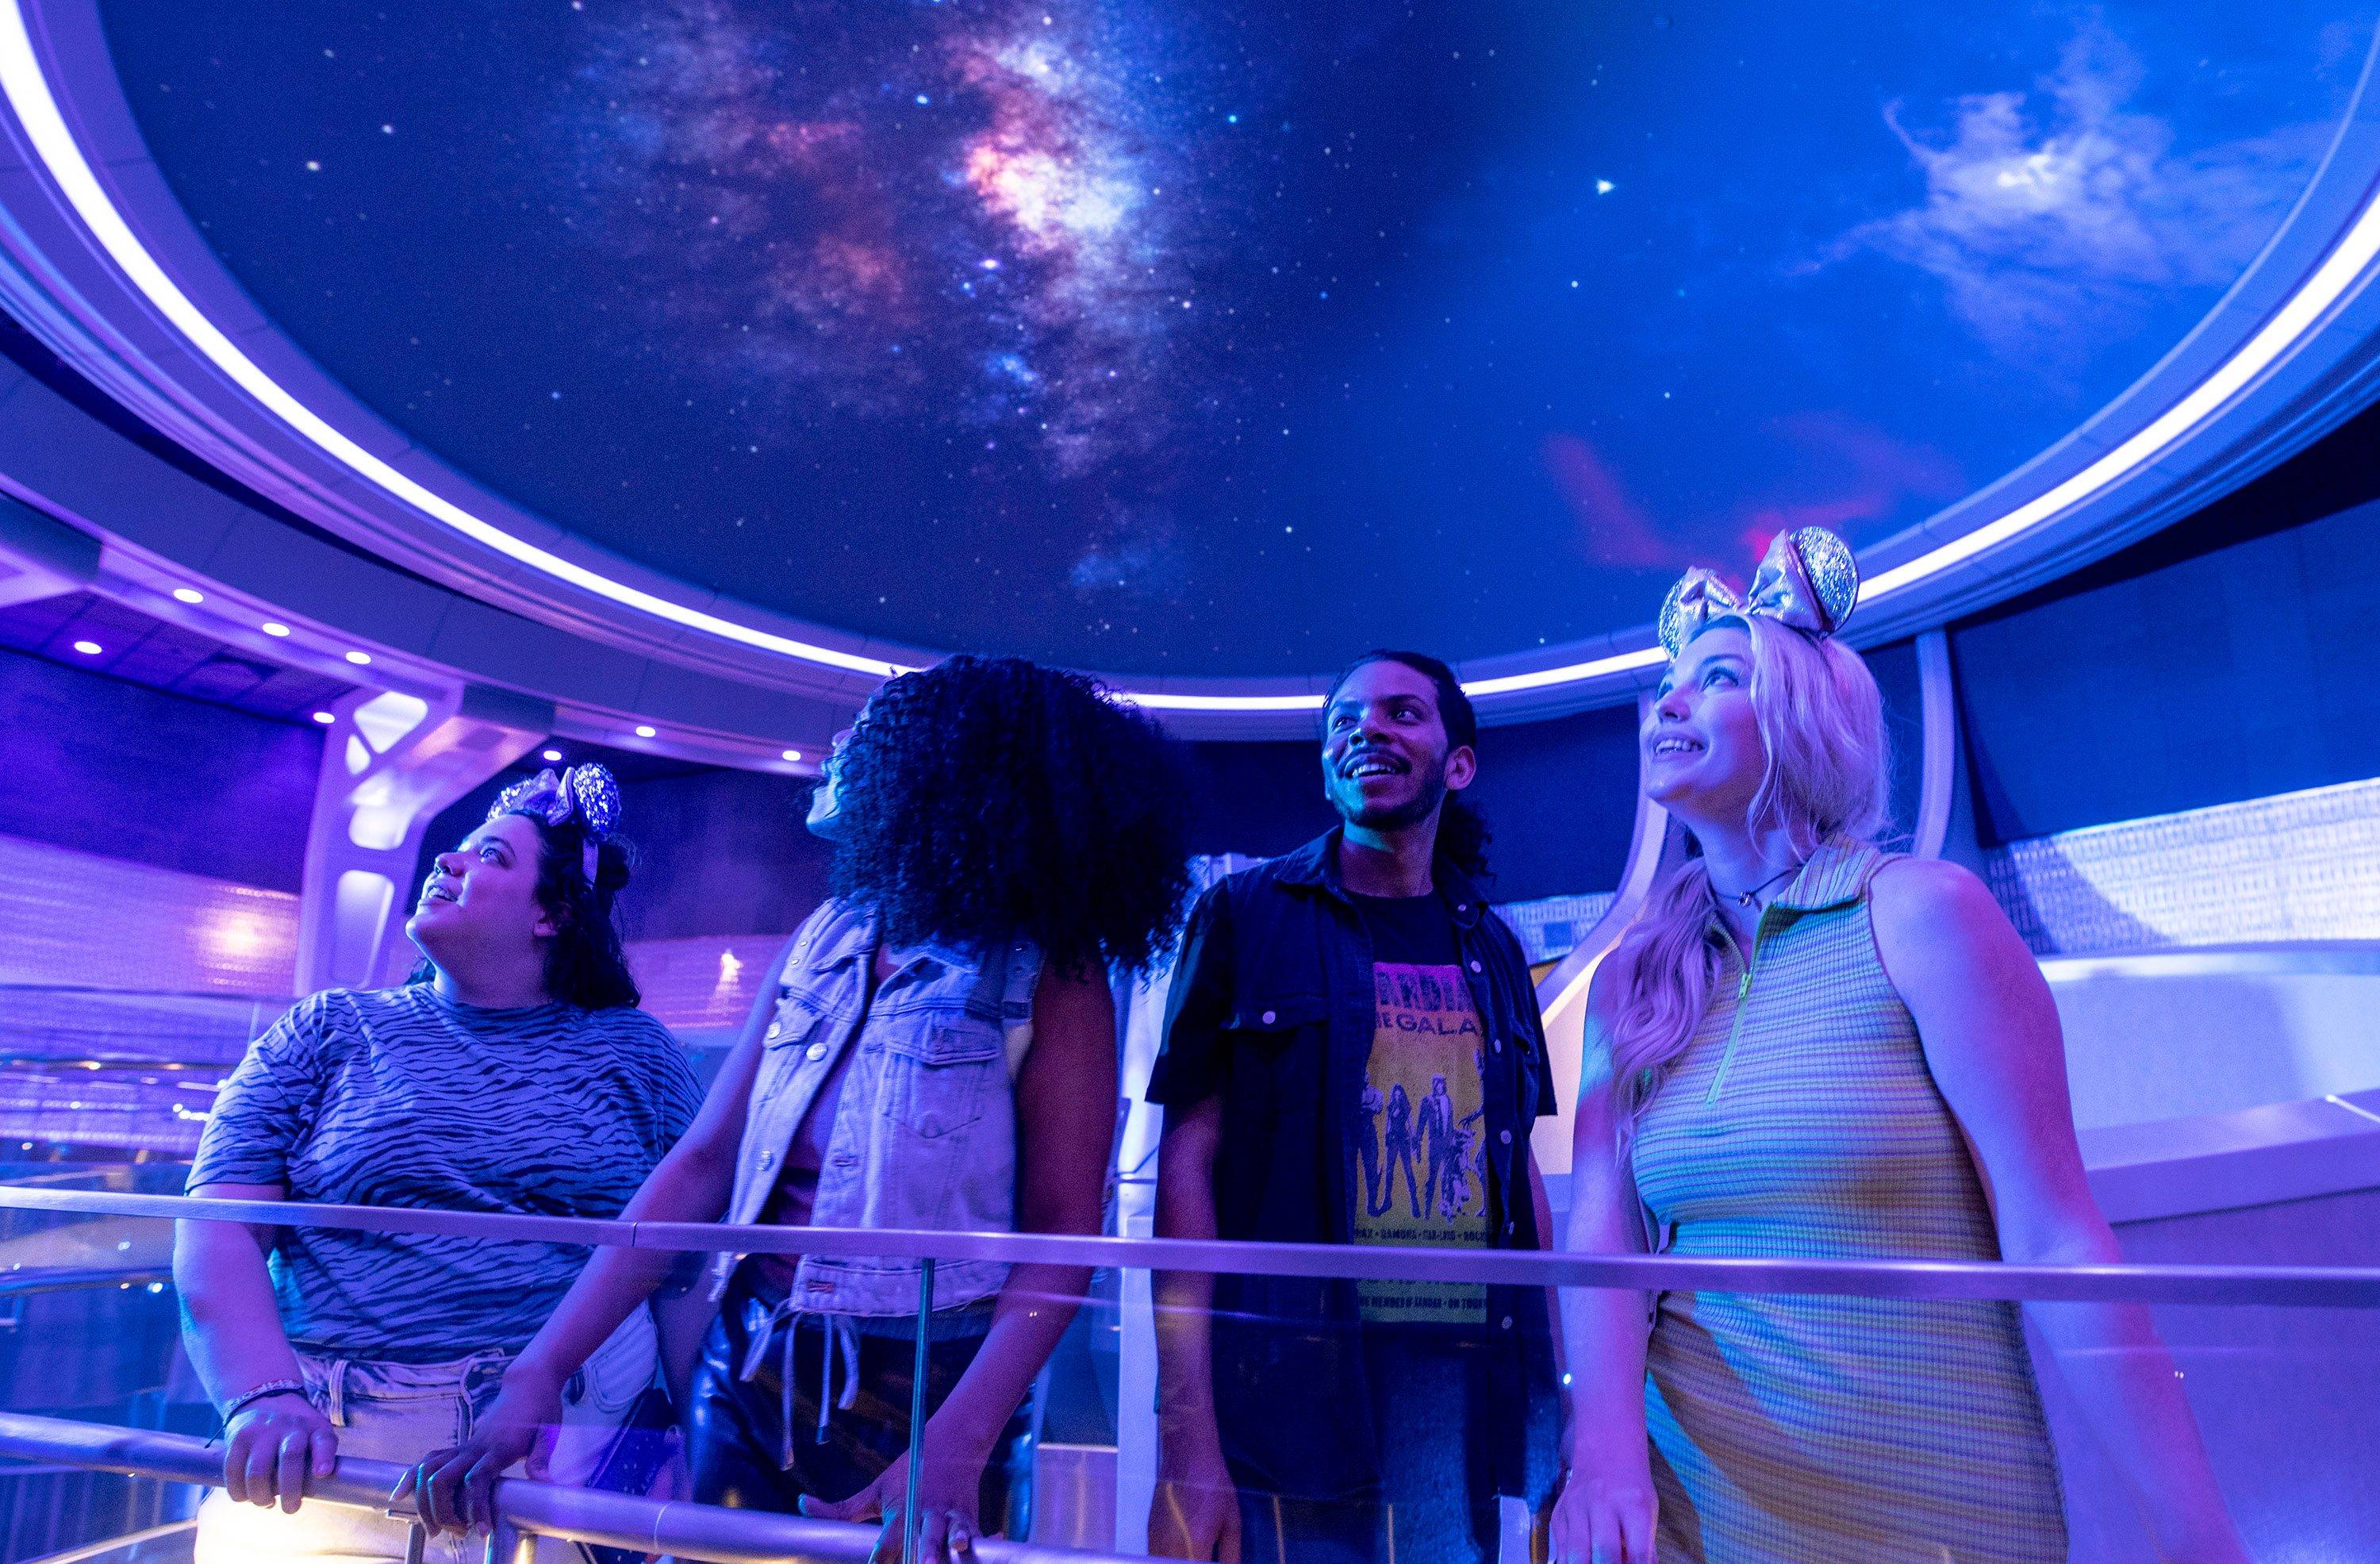 EPCOT guests visit the Galaxarium as part of their experience in Guardians of the Galaxy: Cosmic Rewind